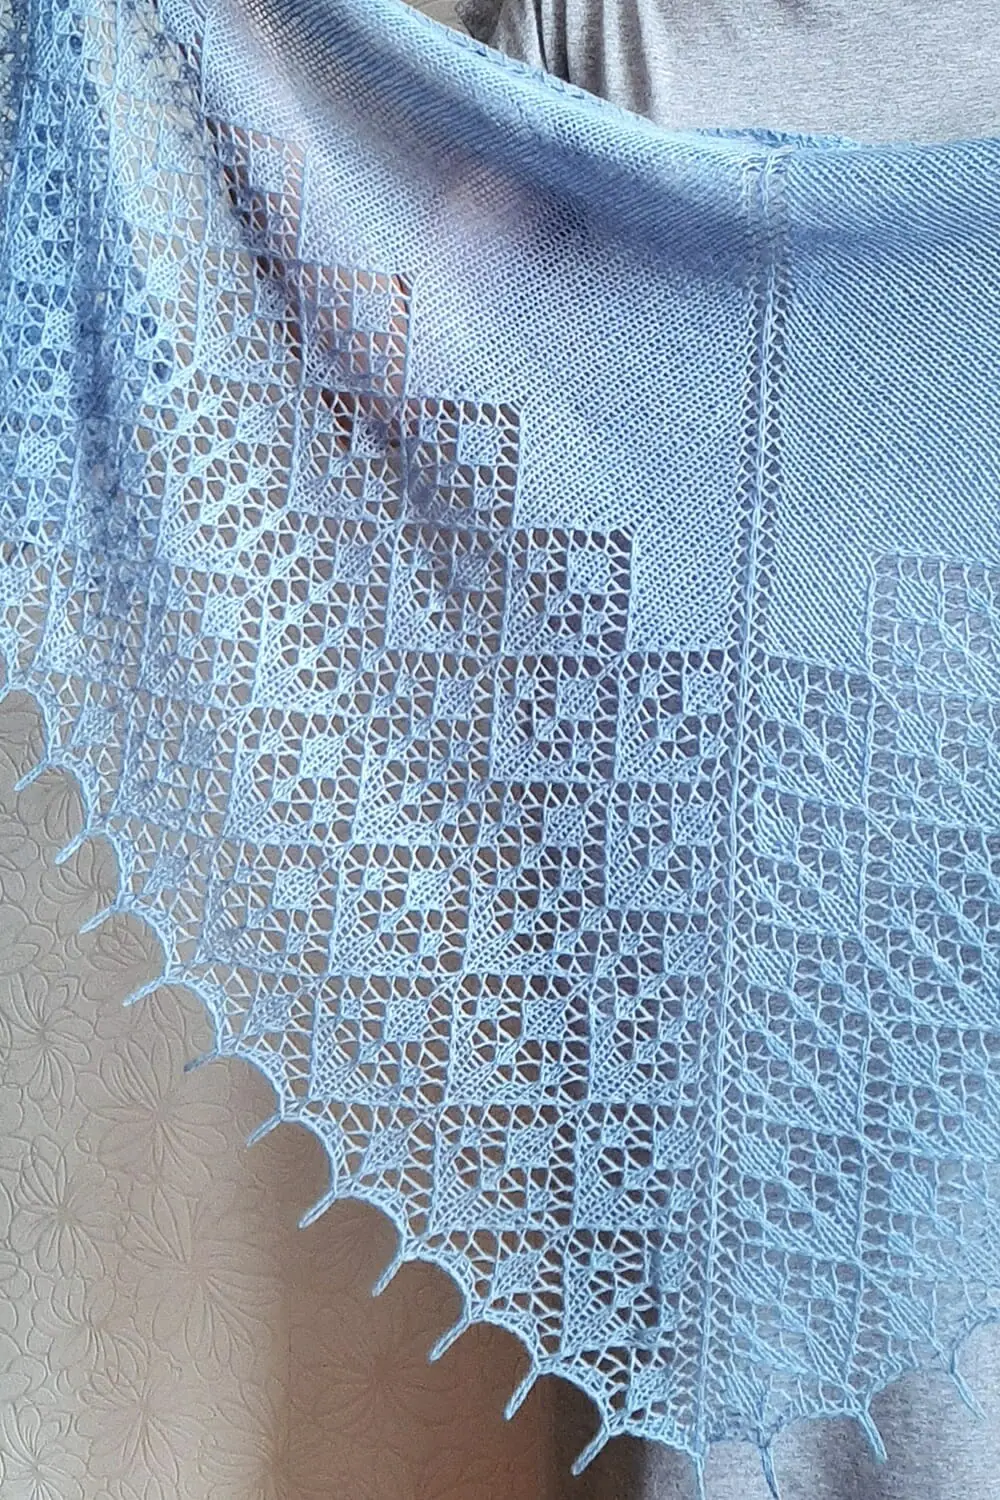 lace shawl knitting pattern for beginner in pdf